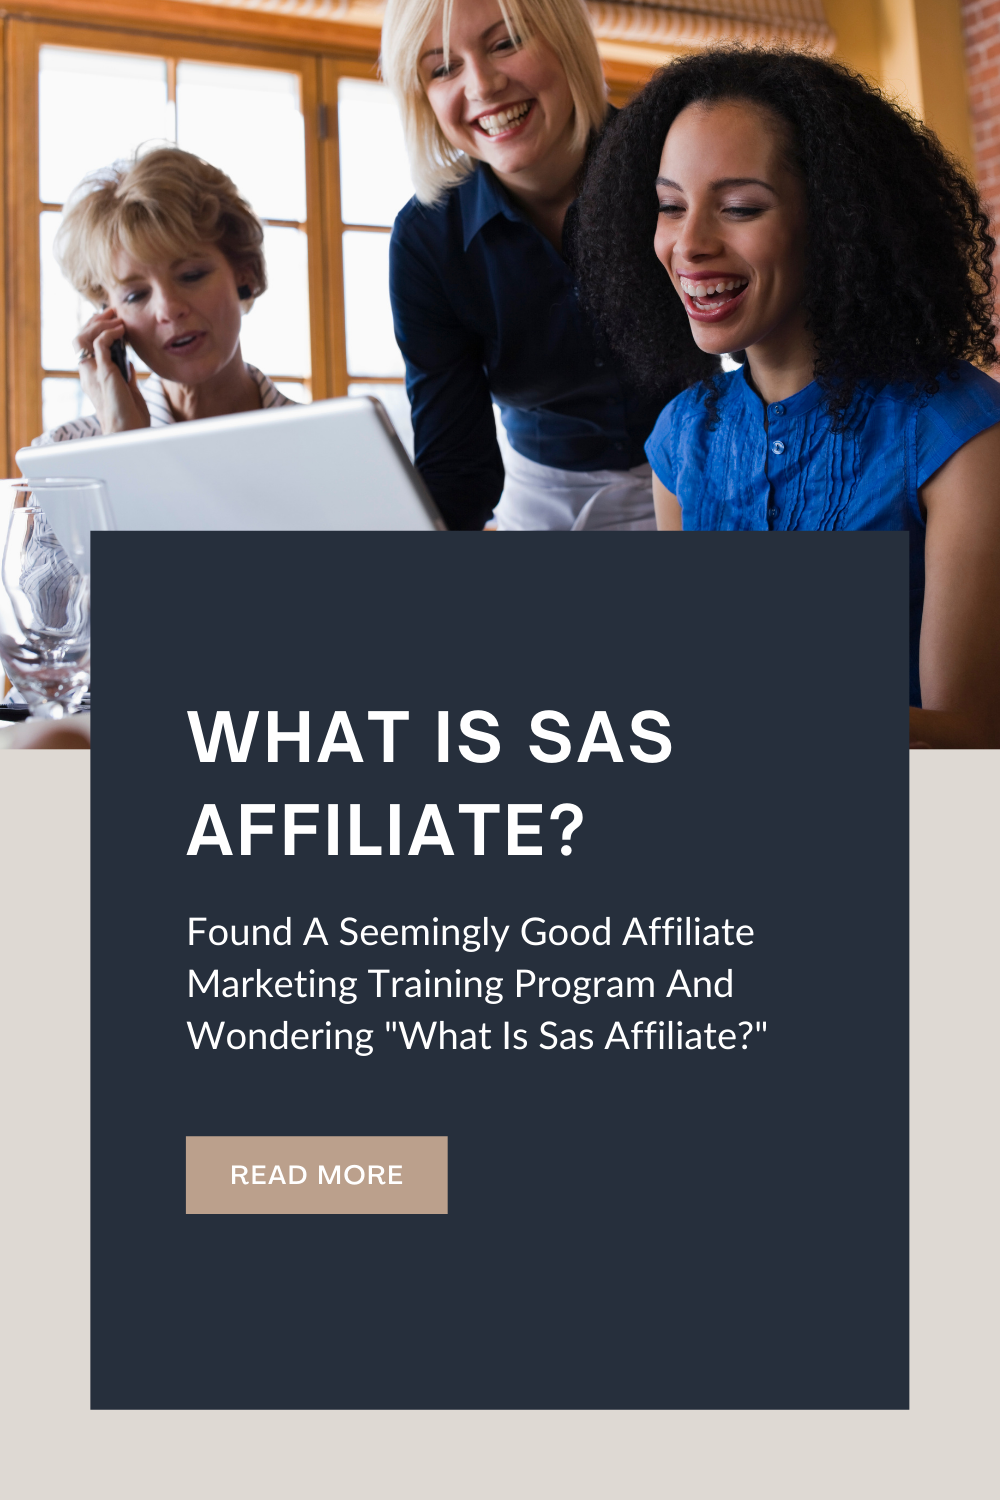 What Is SAS Affiliate?